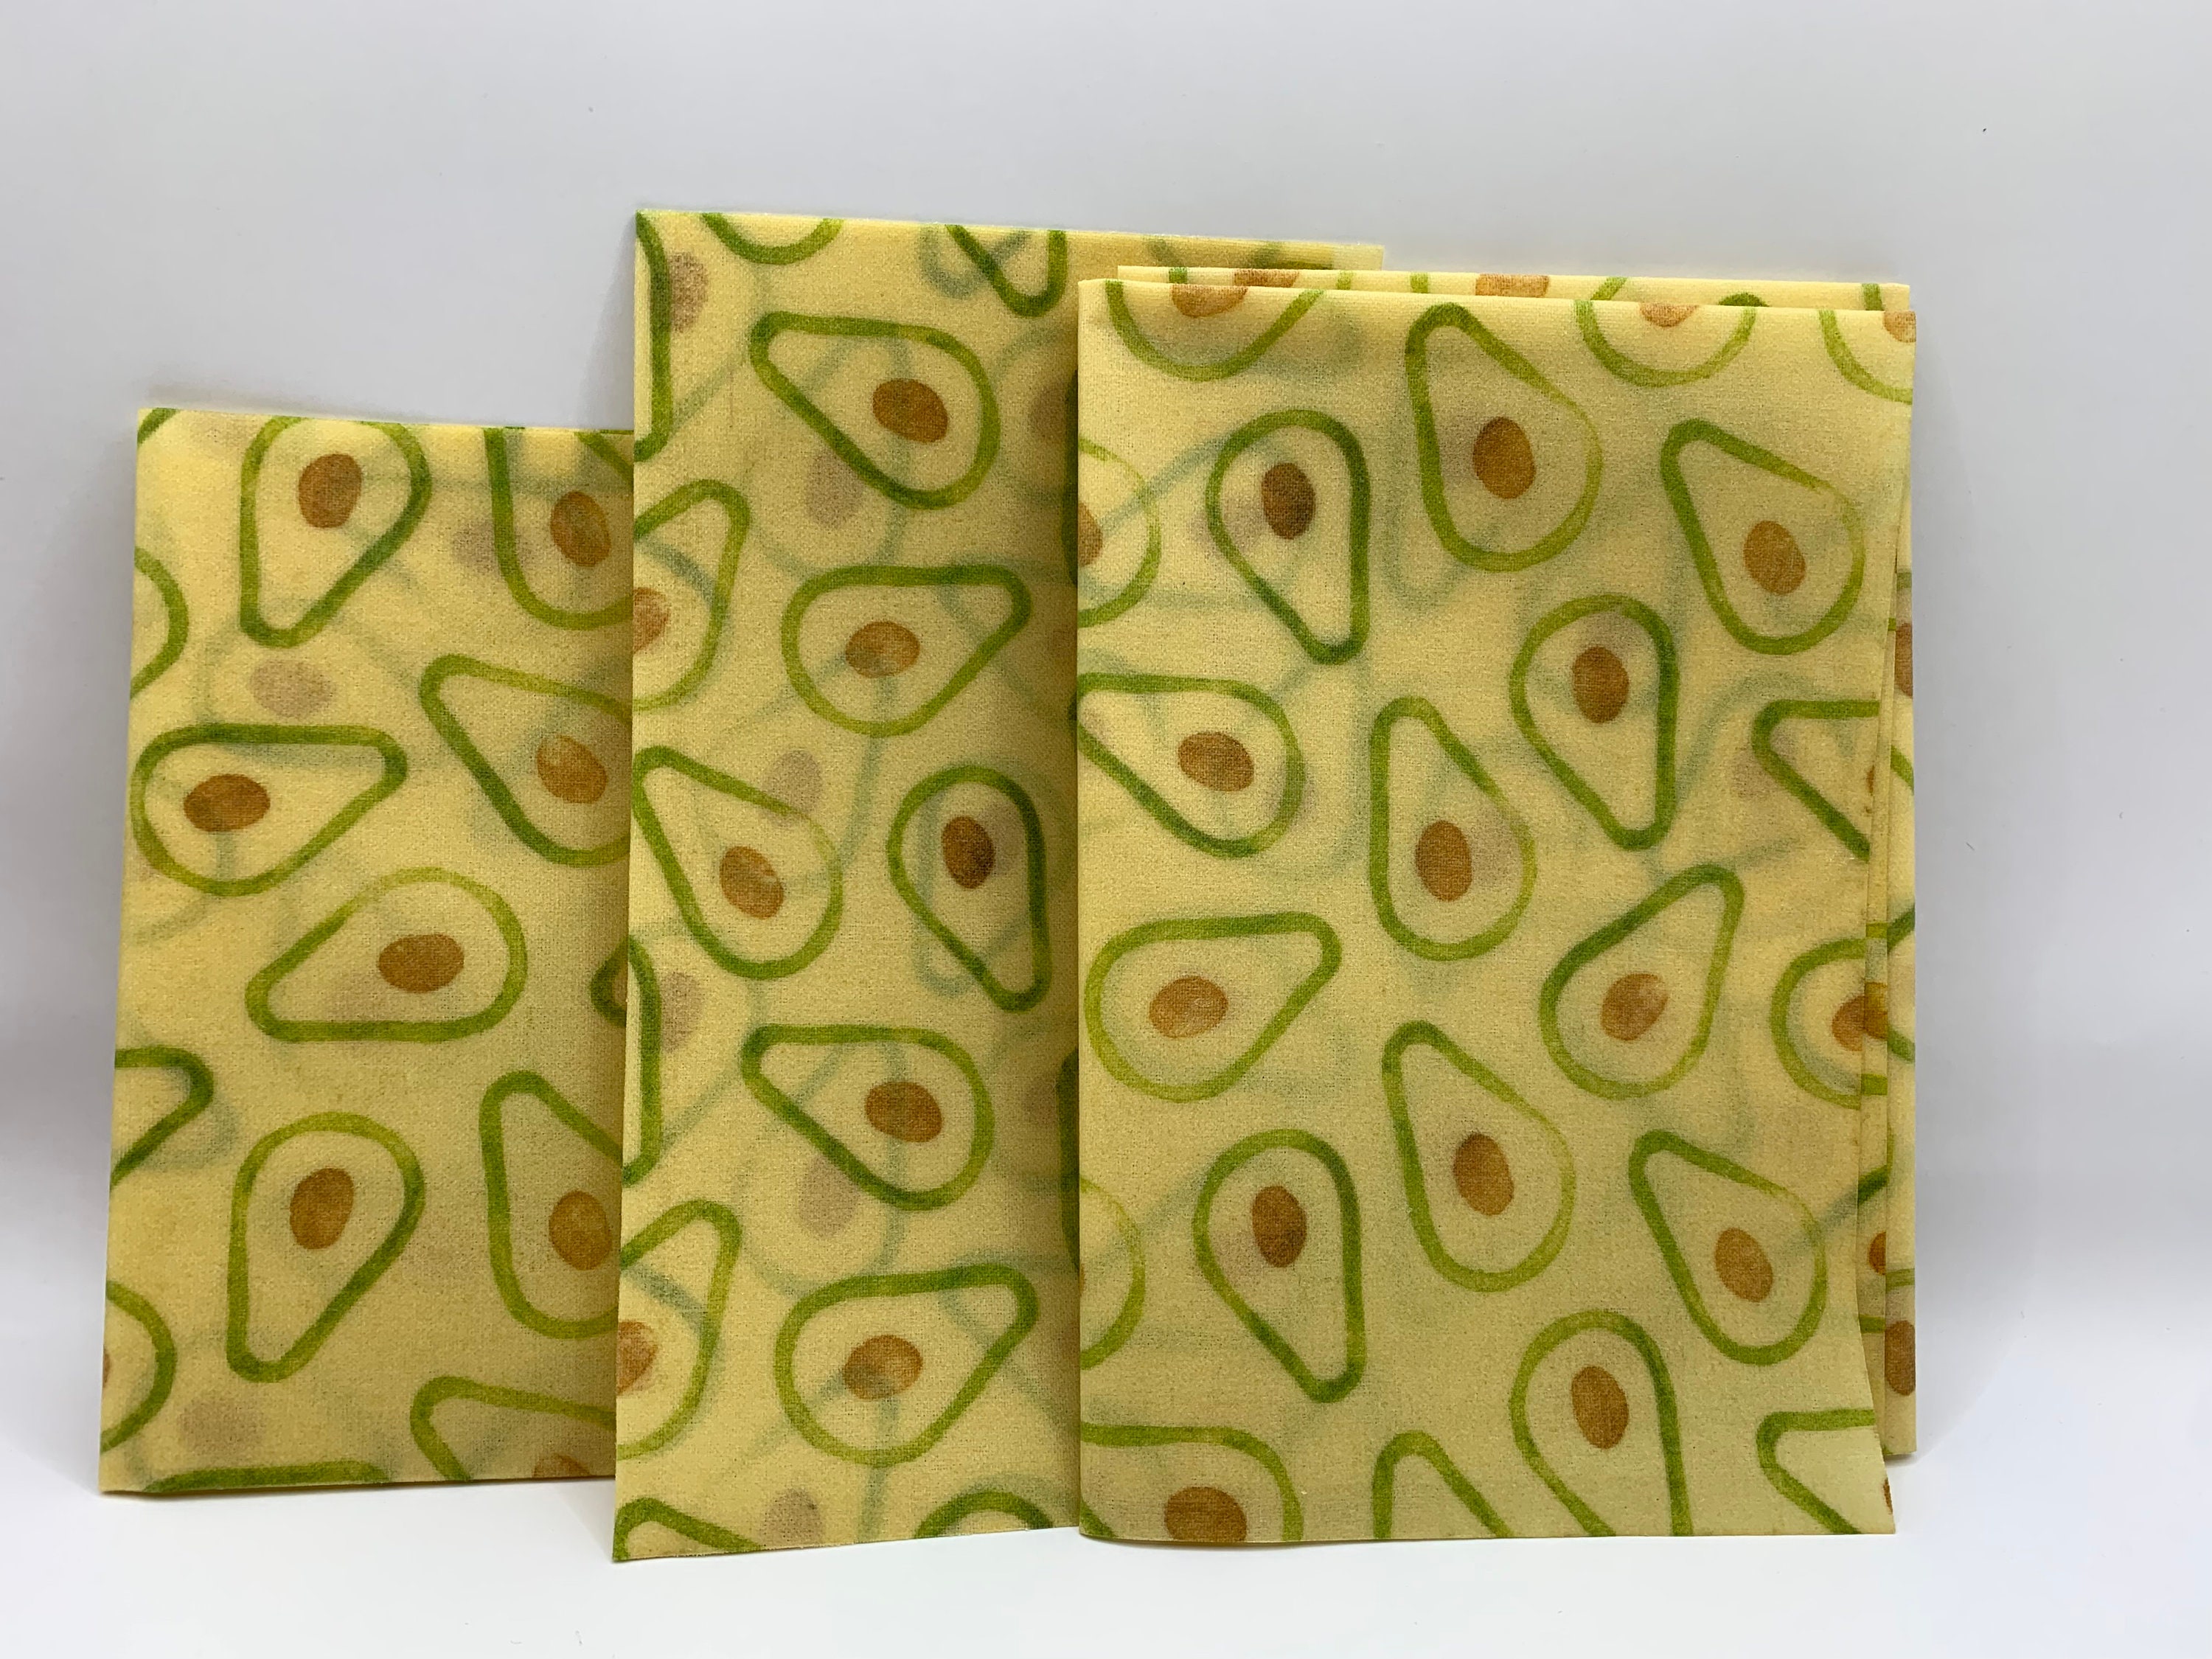 3 PACK Beeswax Food Wrap Natural Organic Beeswax Wraps 